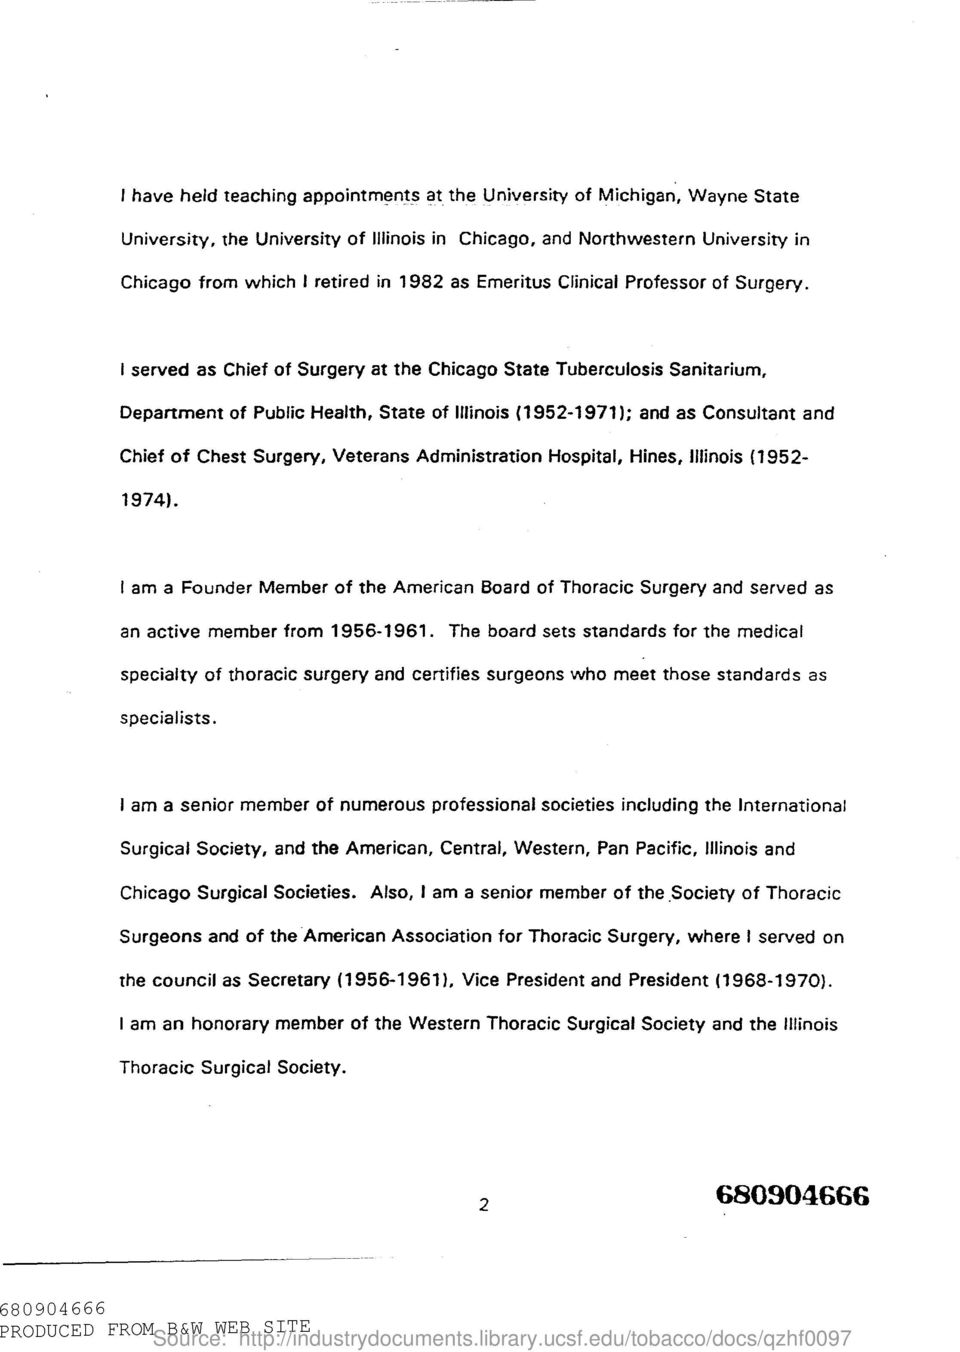 I served as Chief of Surgery at the Chicago State Tuberculosis Sanitarium, Department of Public Health, State of Illinois (1952-1971) ; and as Consultant and Chief of Chest Surgery, Veterans